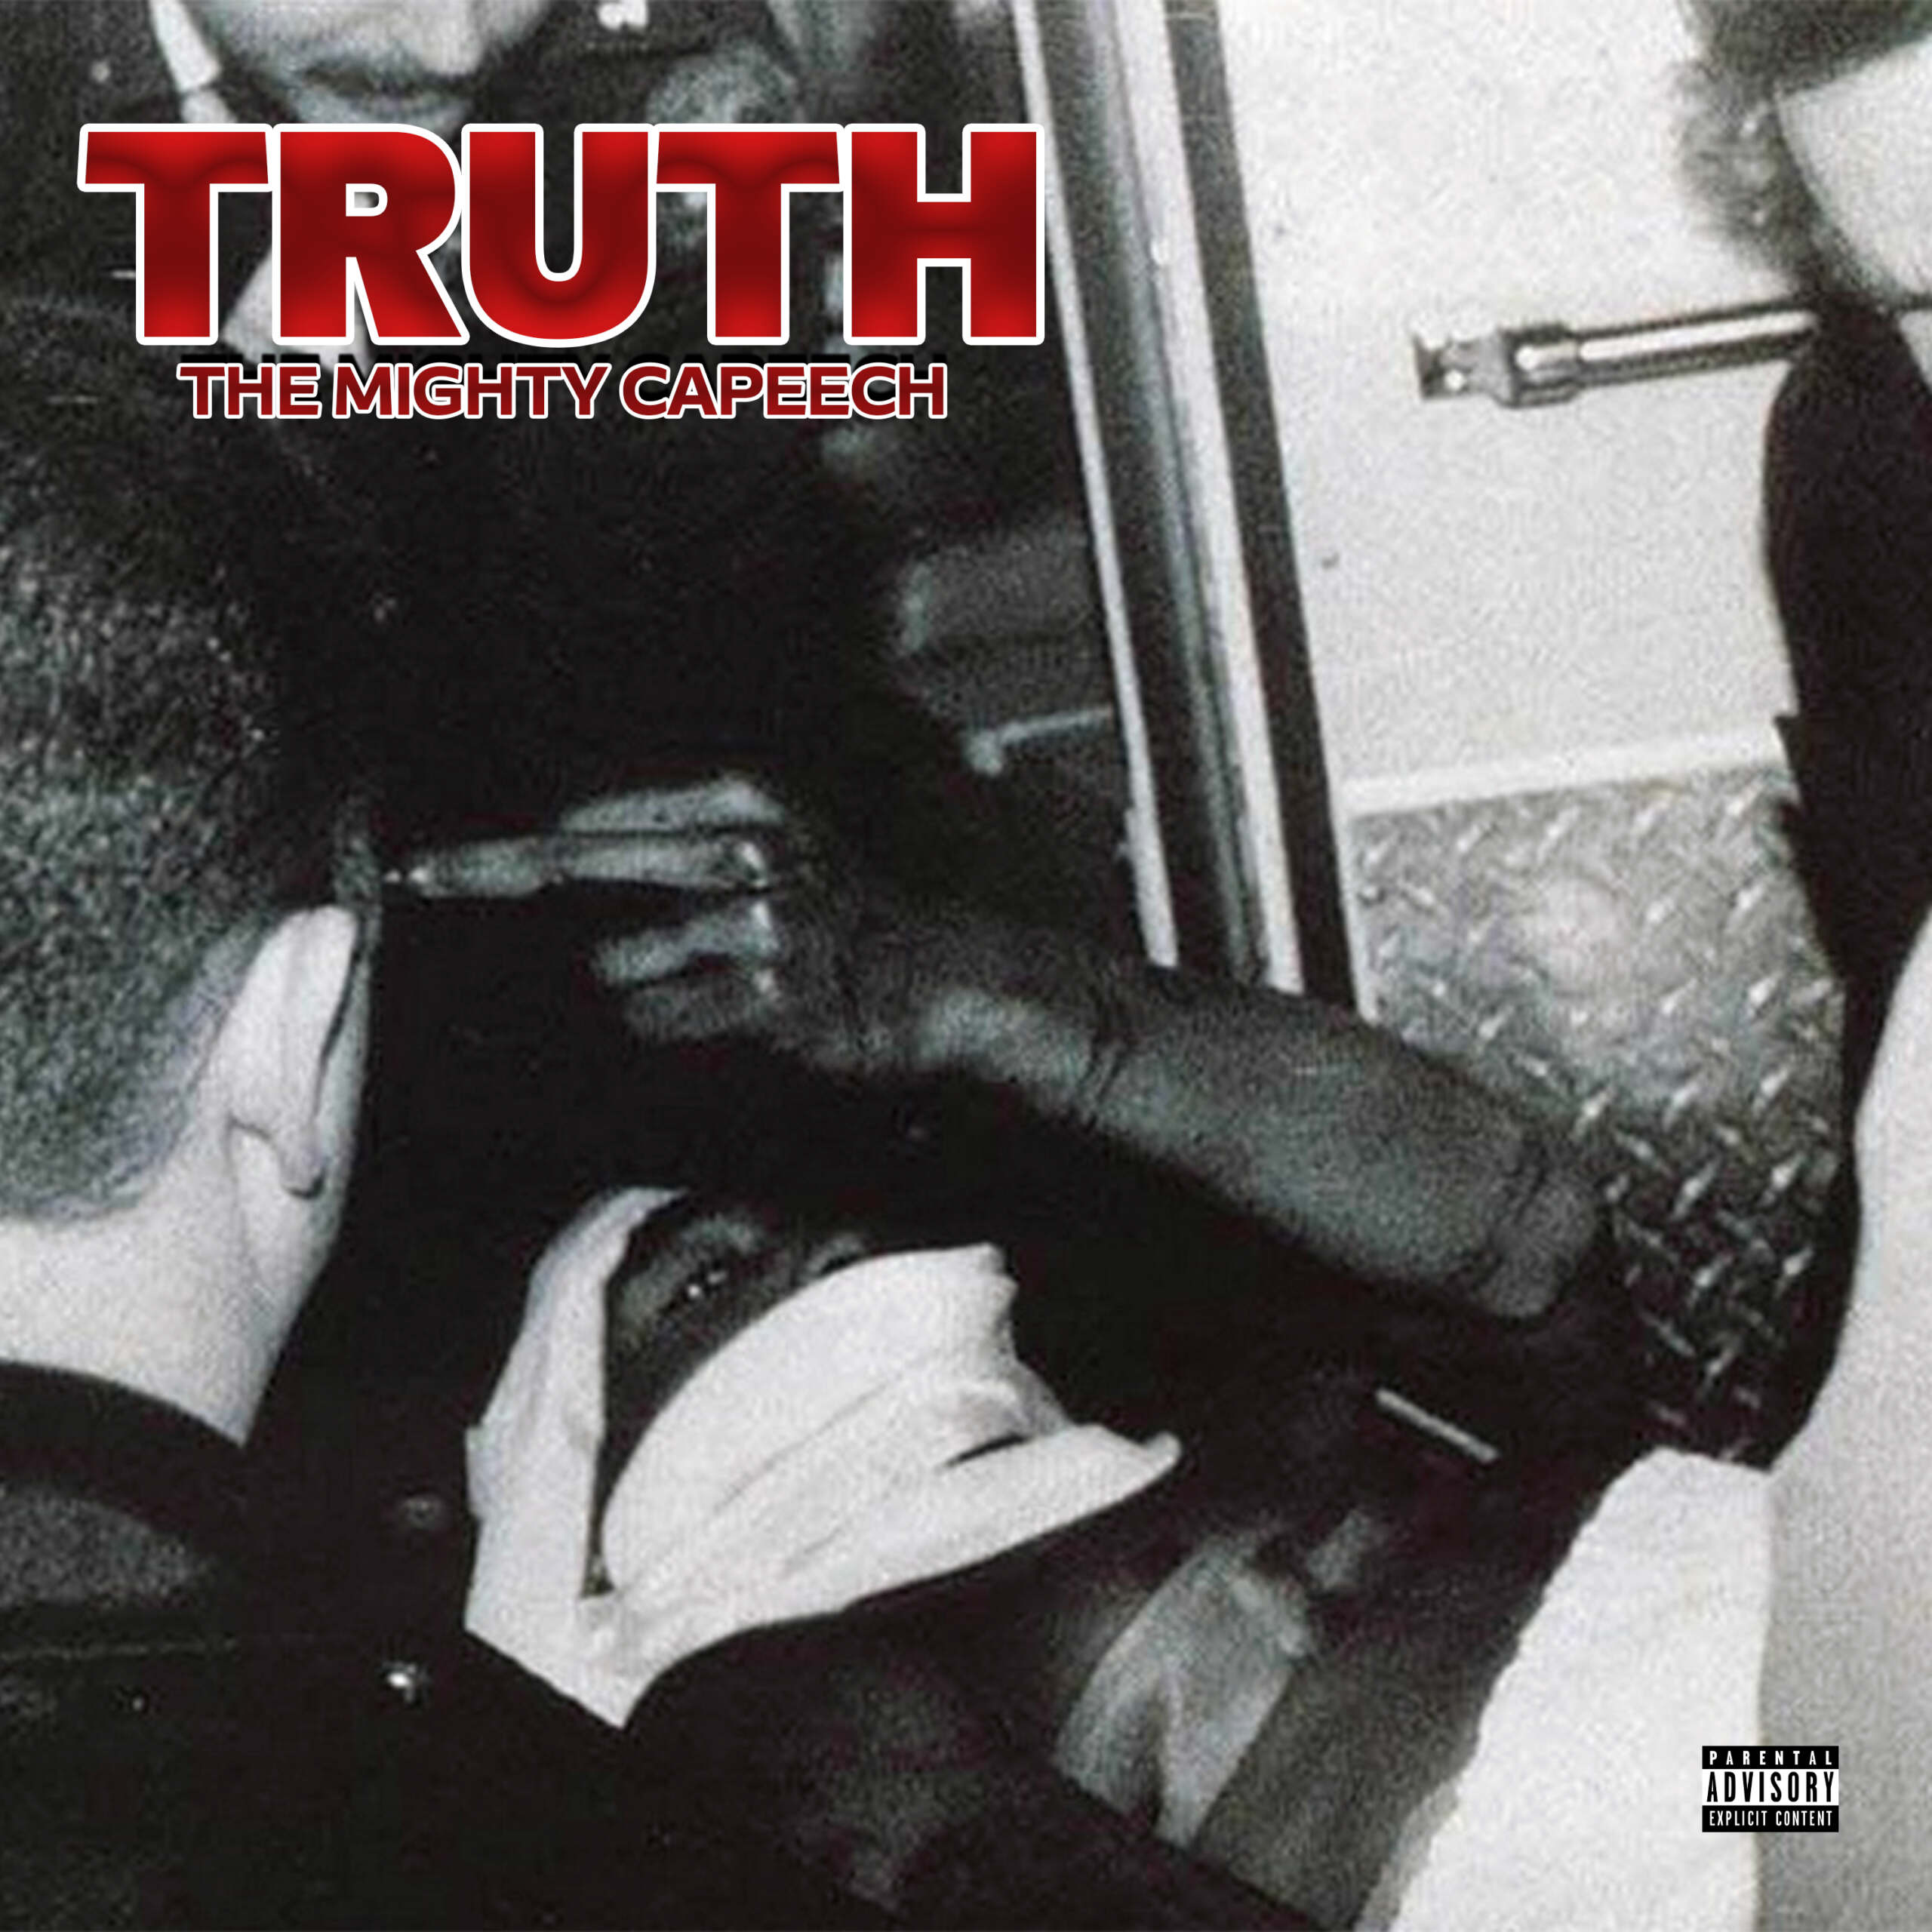 Audio: The Mighty Capeech - Truth (Freestyle)